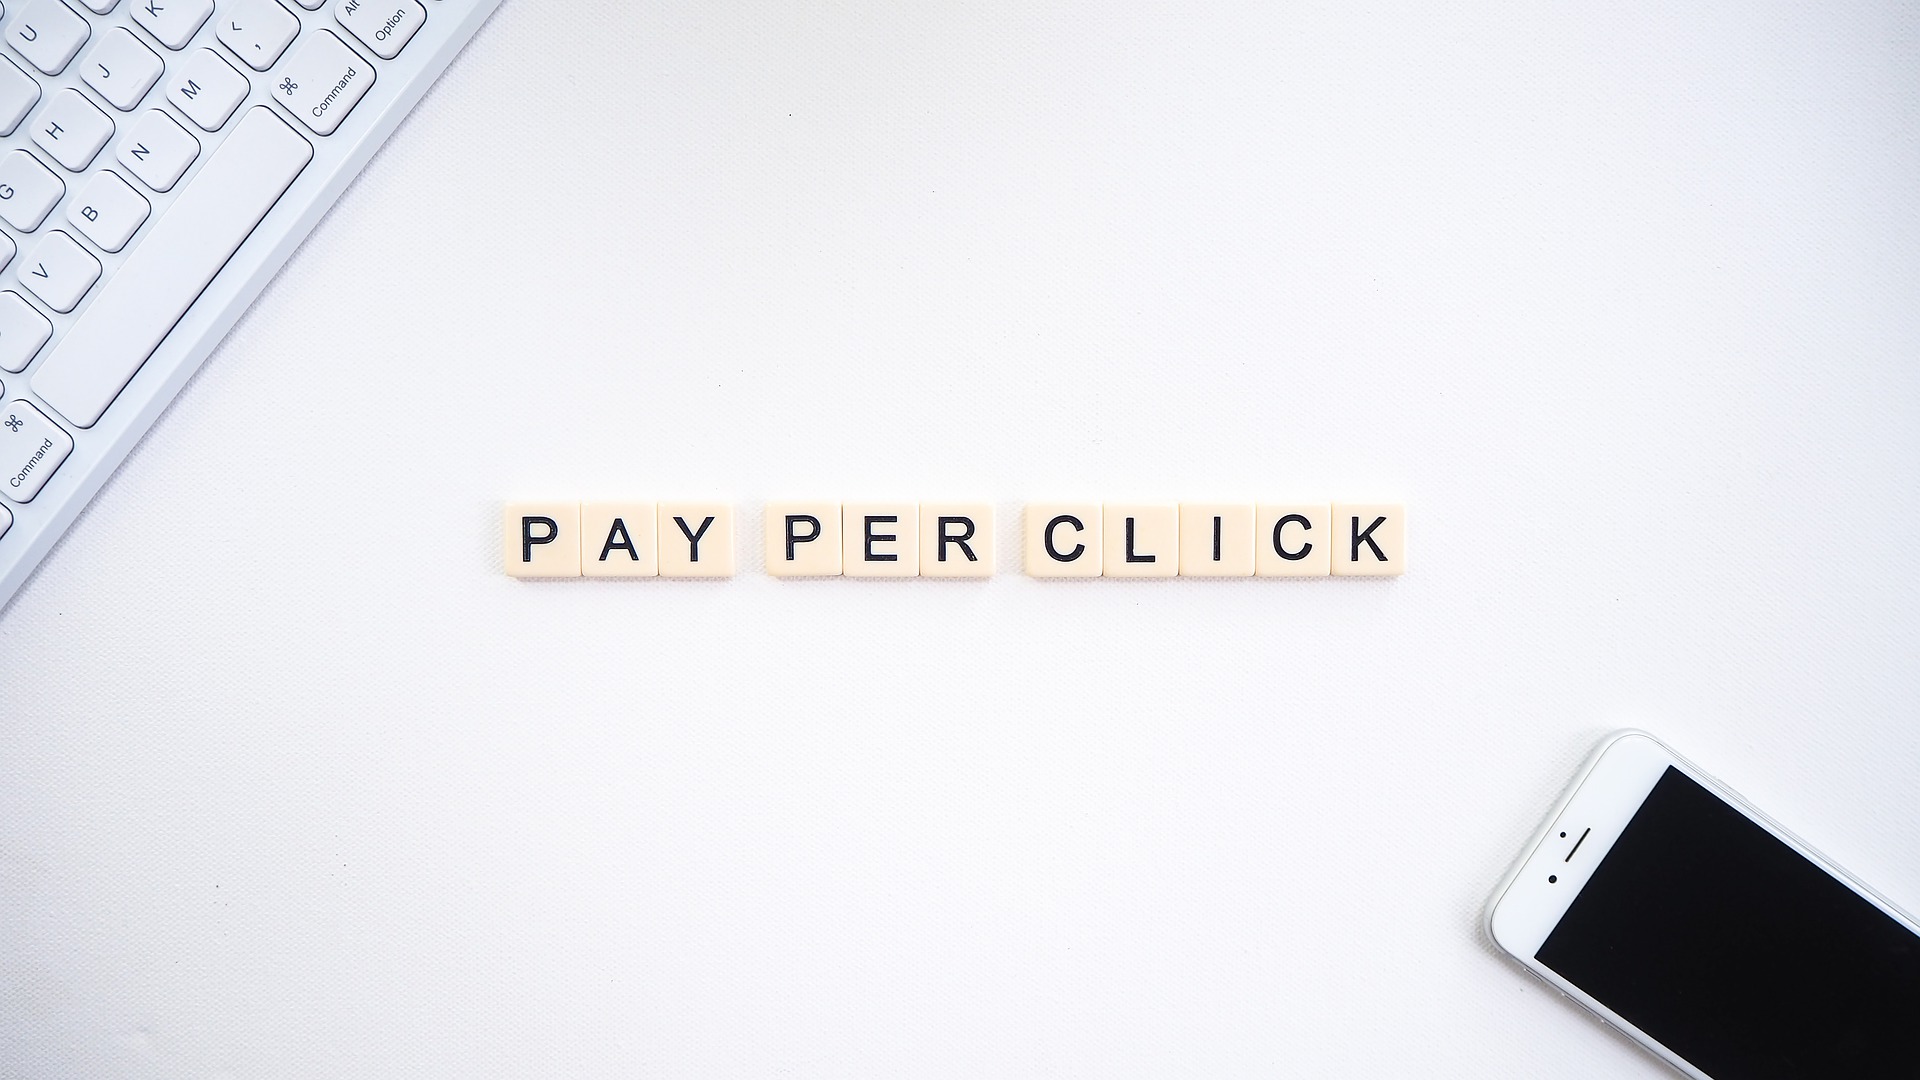 Pay Per Click sign on the white surface